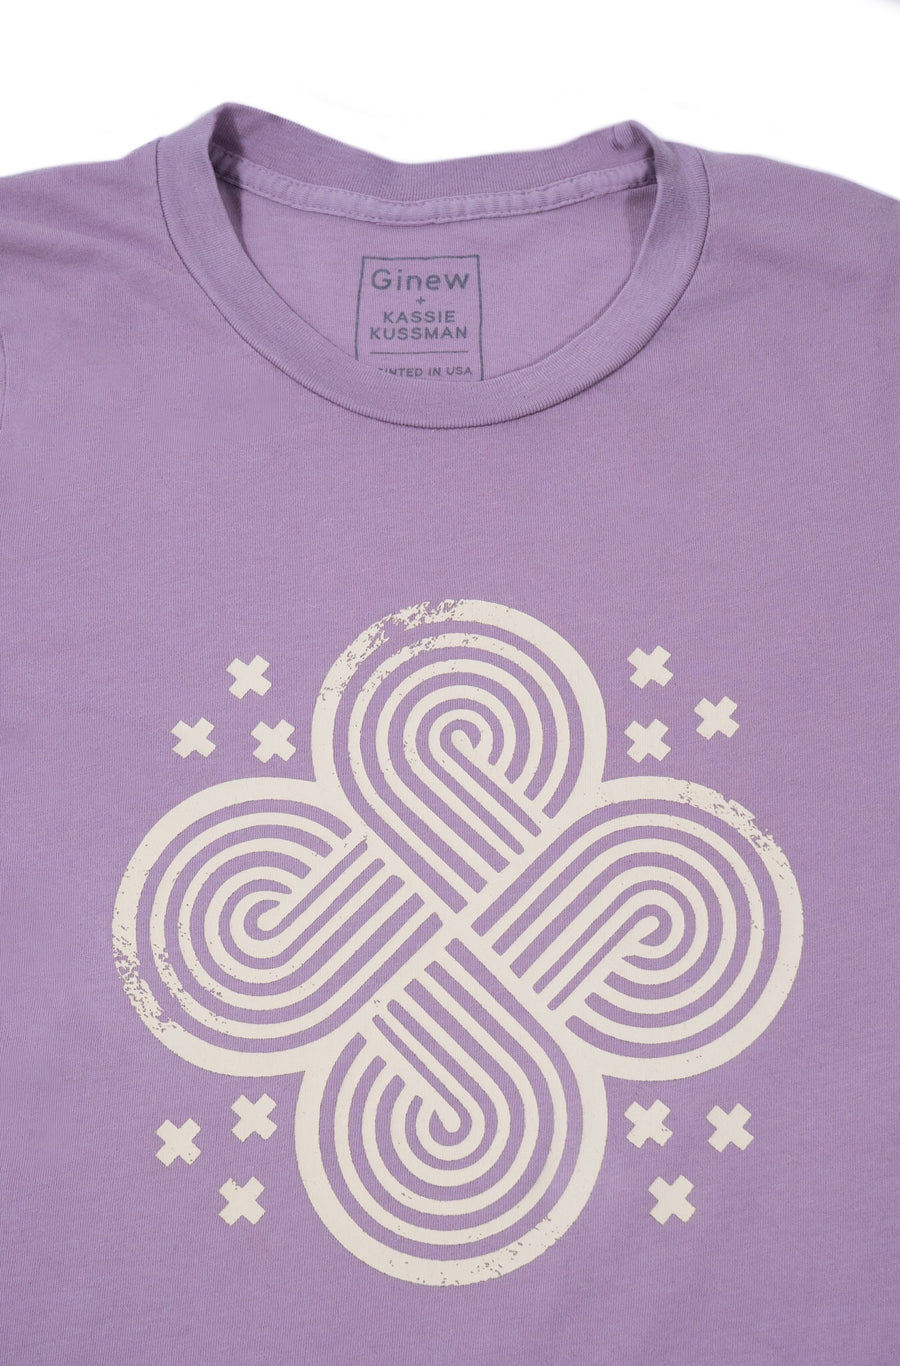 Four Directions Knot Tee by Ginew